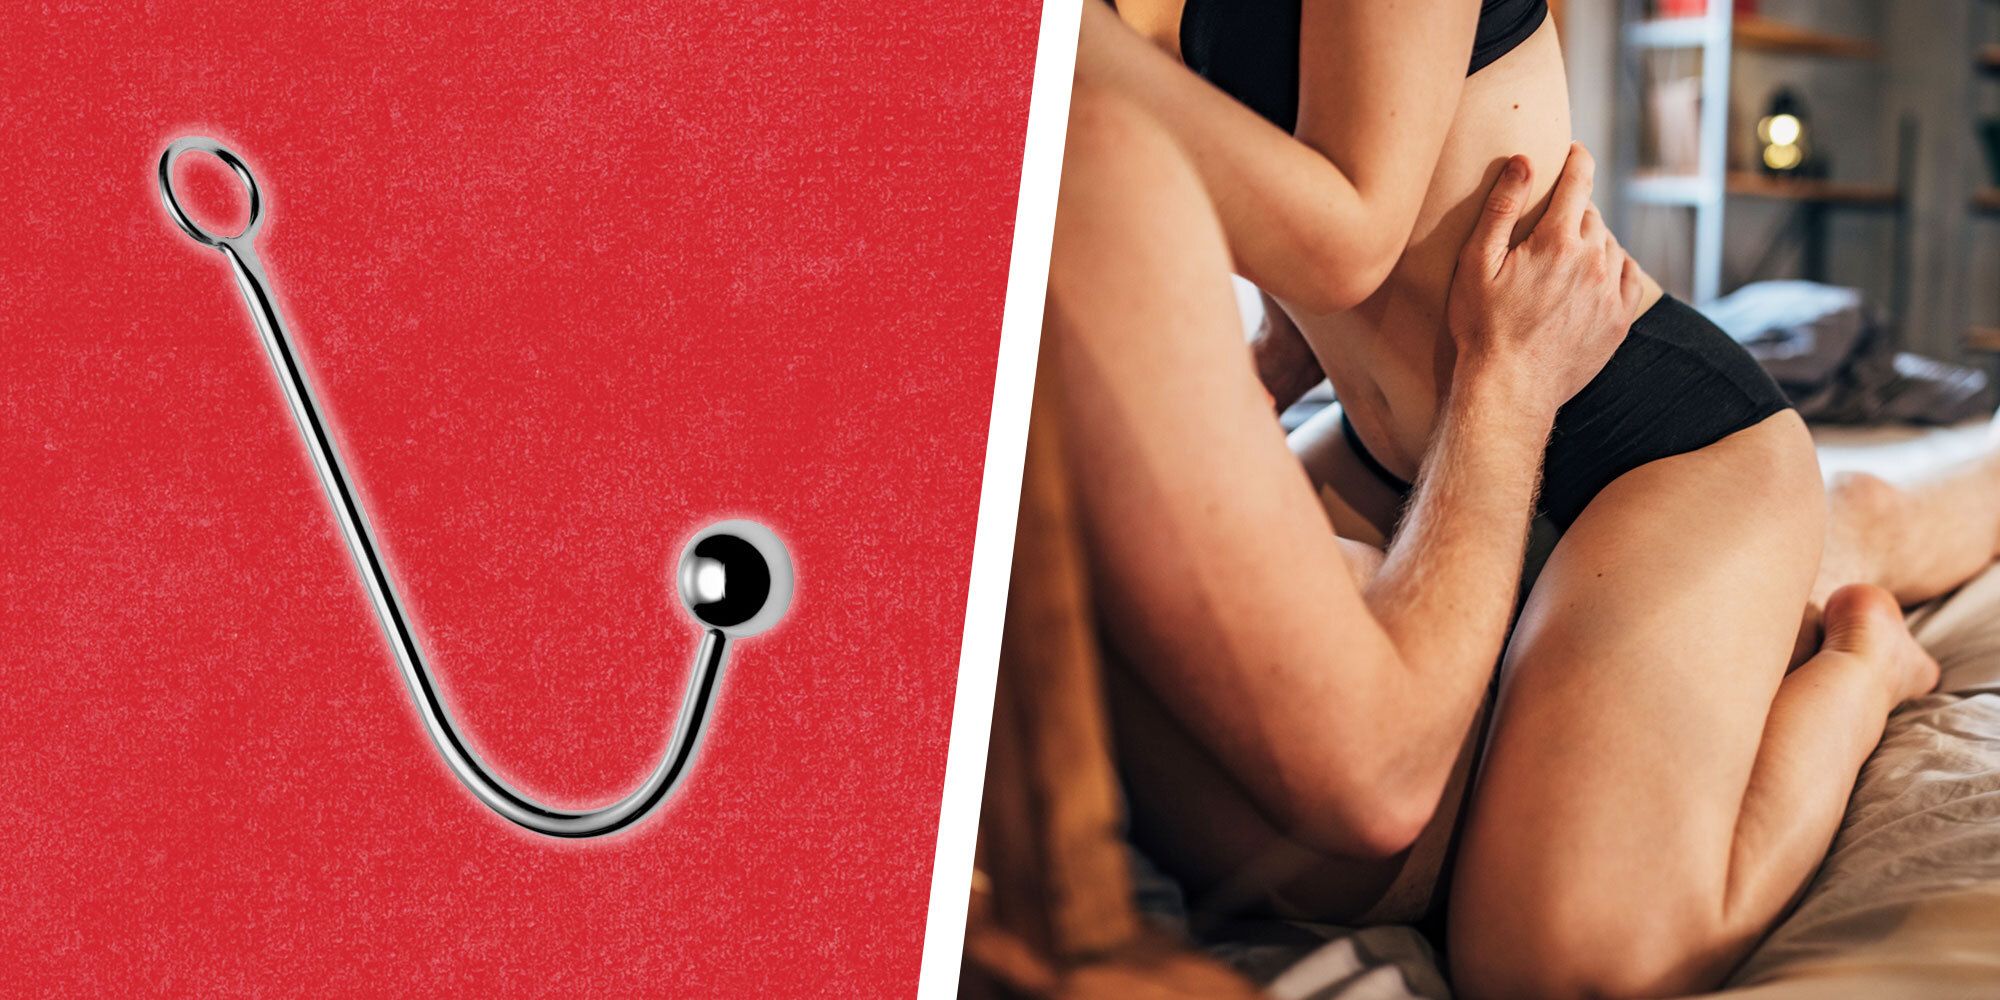 Anal Hooks What They Are and How to Use Them, According to Experts picture